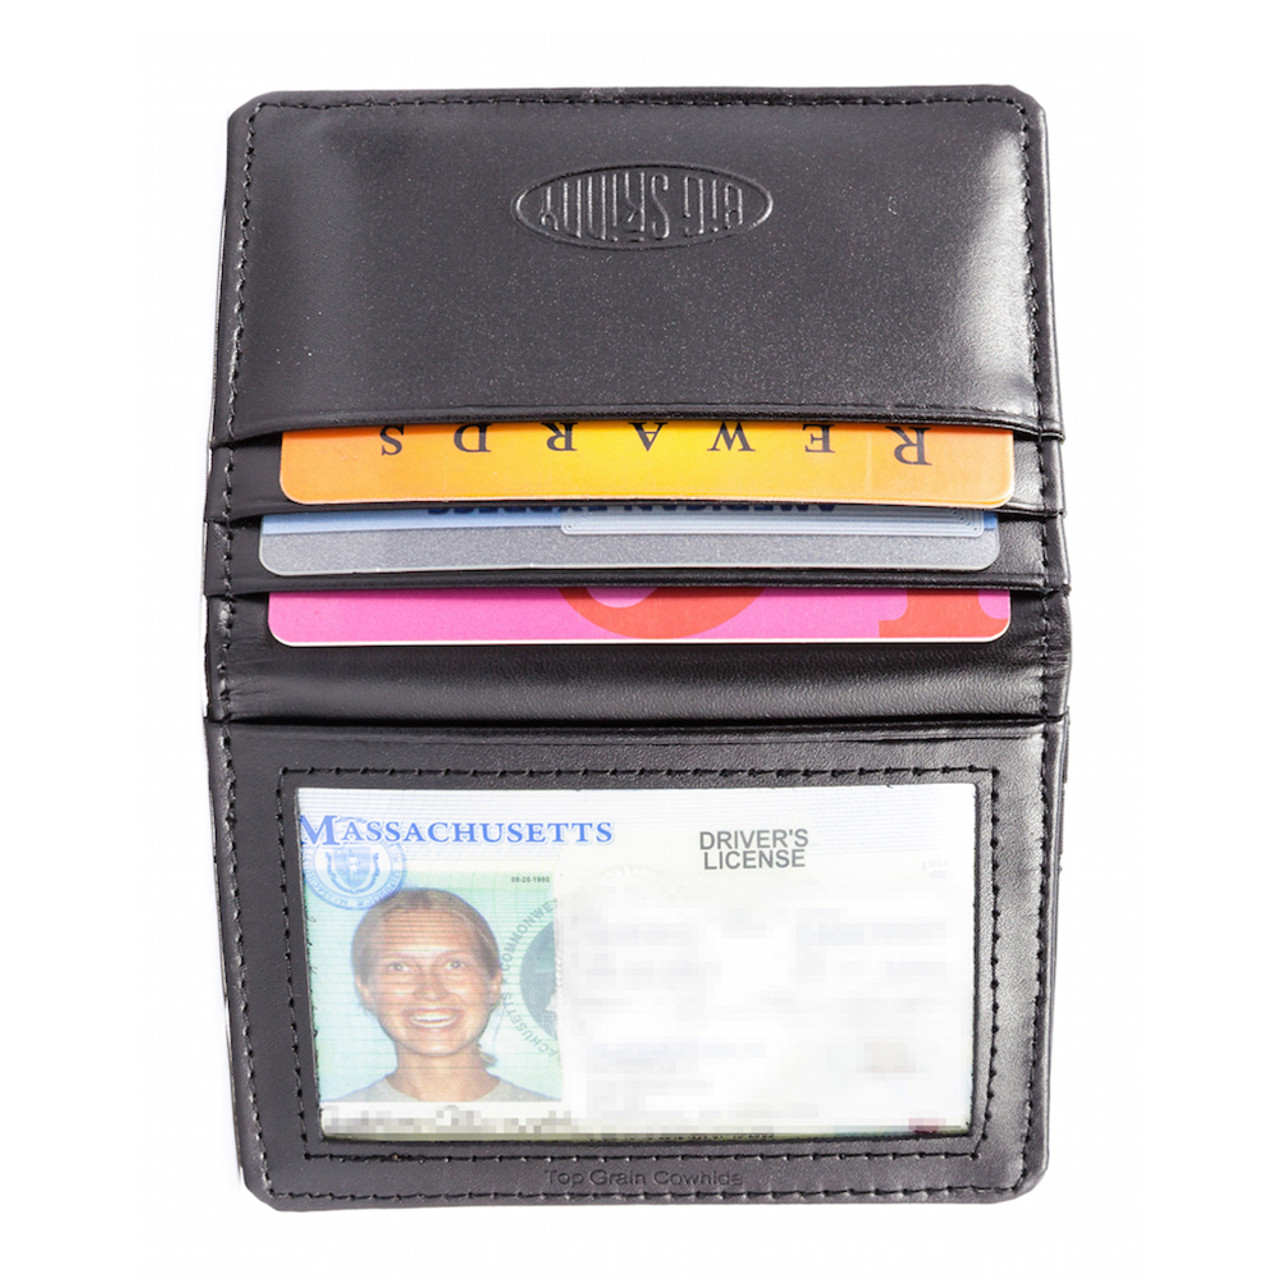 New Yorker Leather Card Holder 